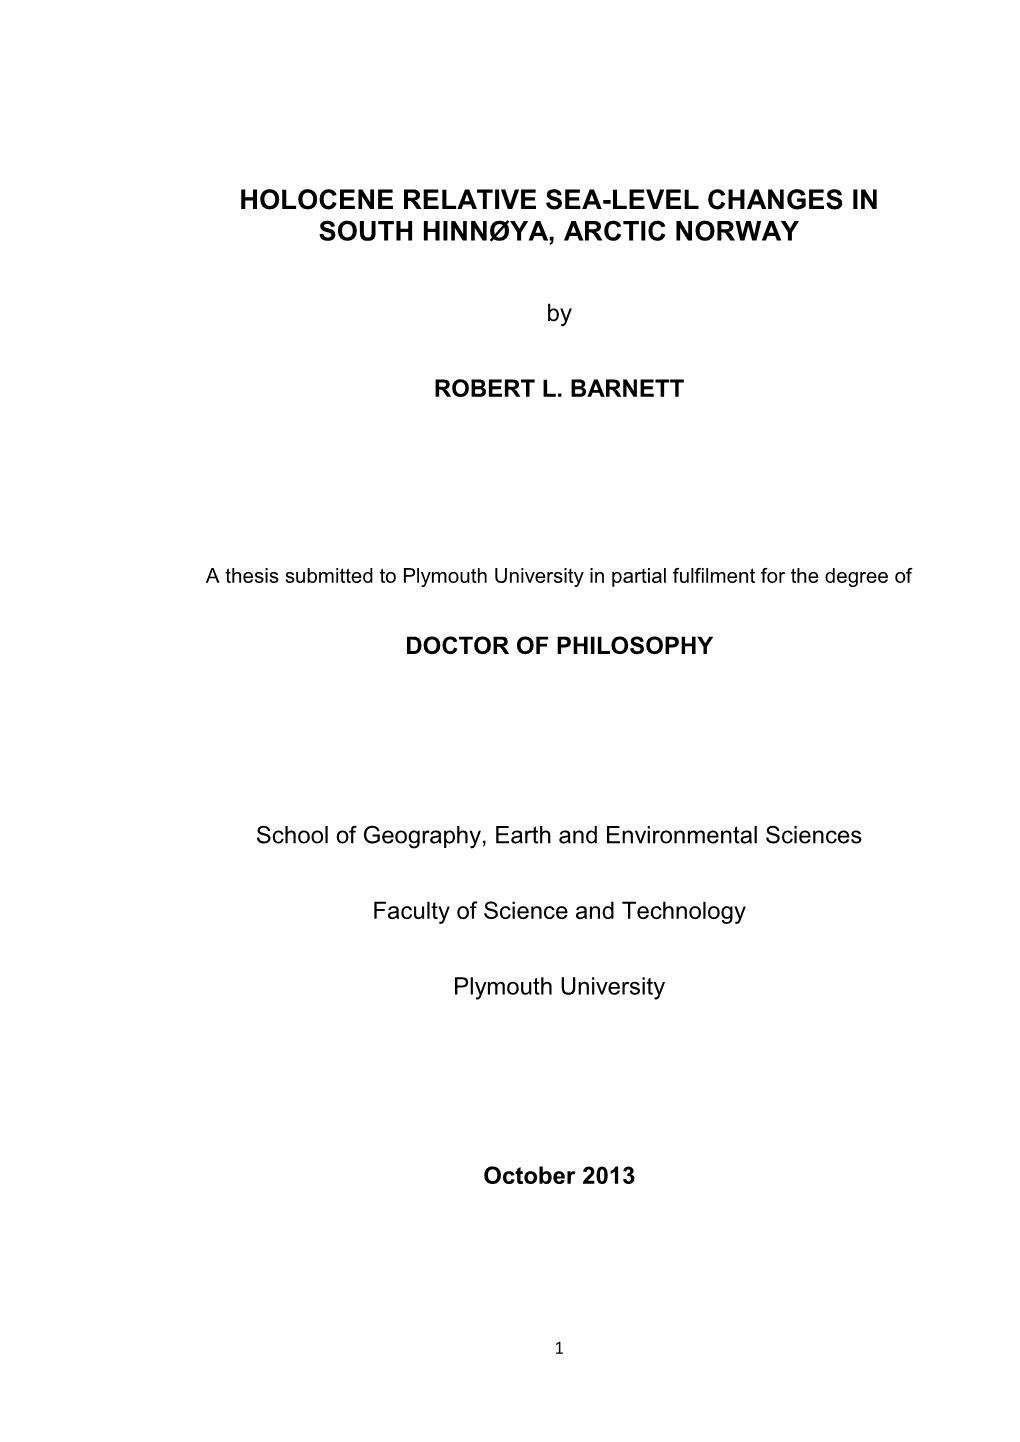 Holocene Relative Sea-Level Changes in South Hinnøya, Arctic Norway